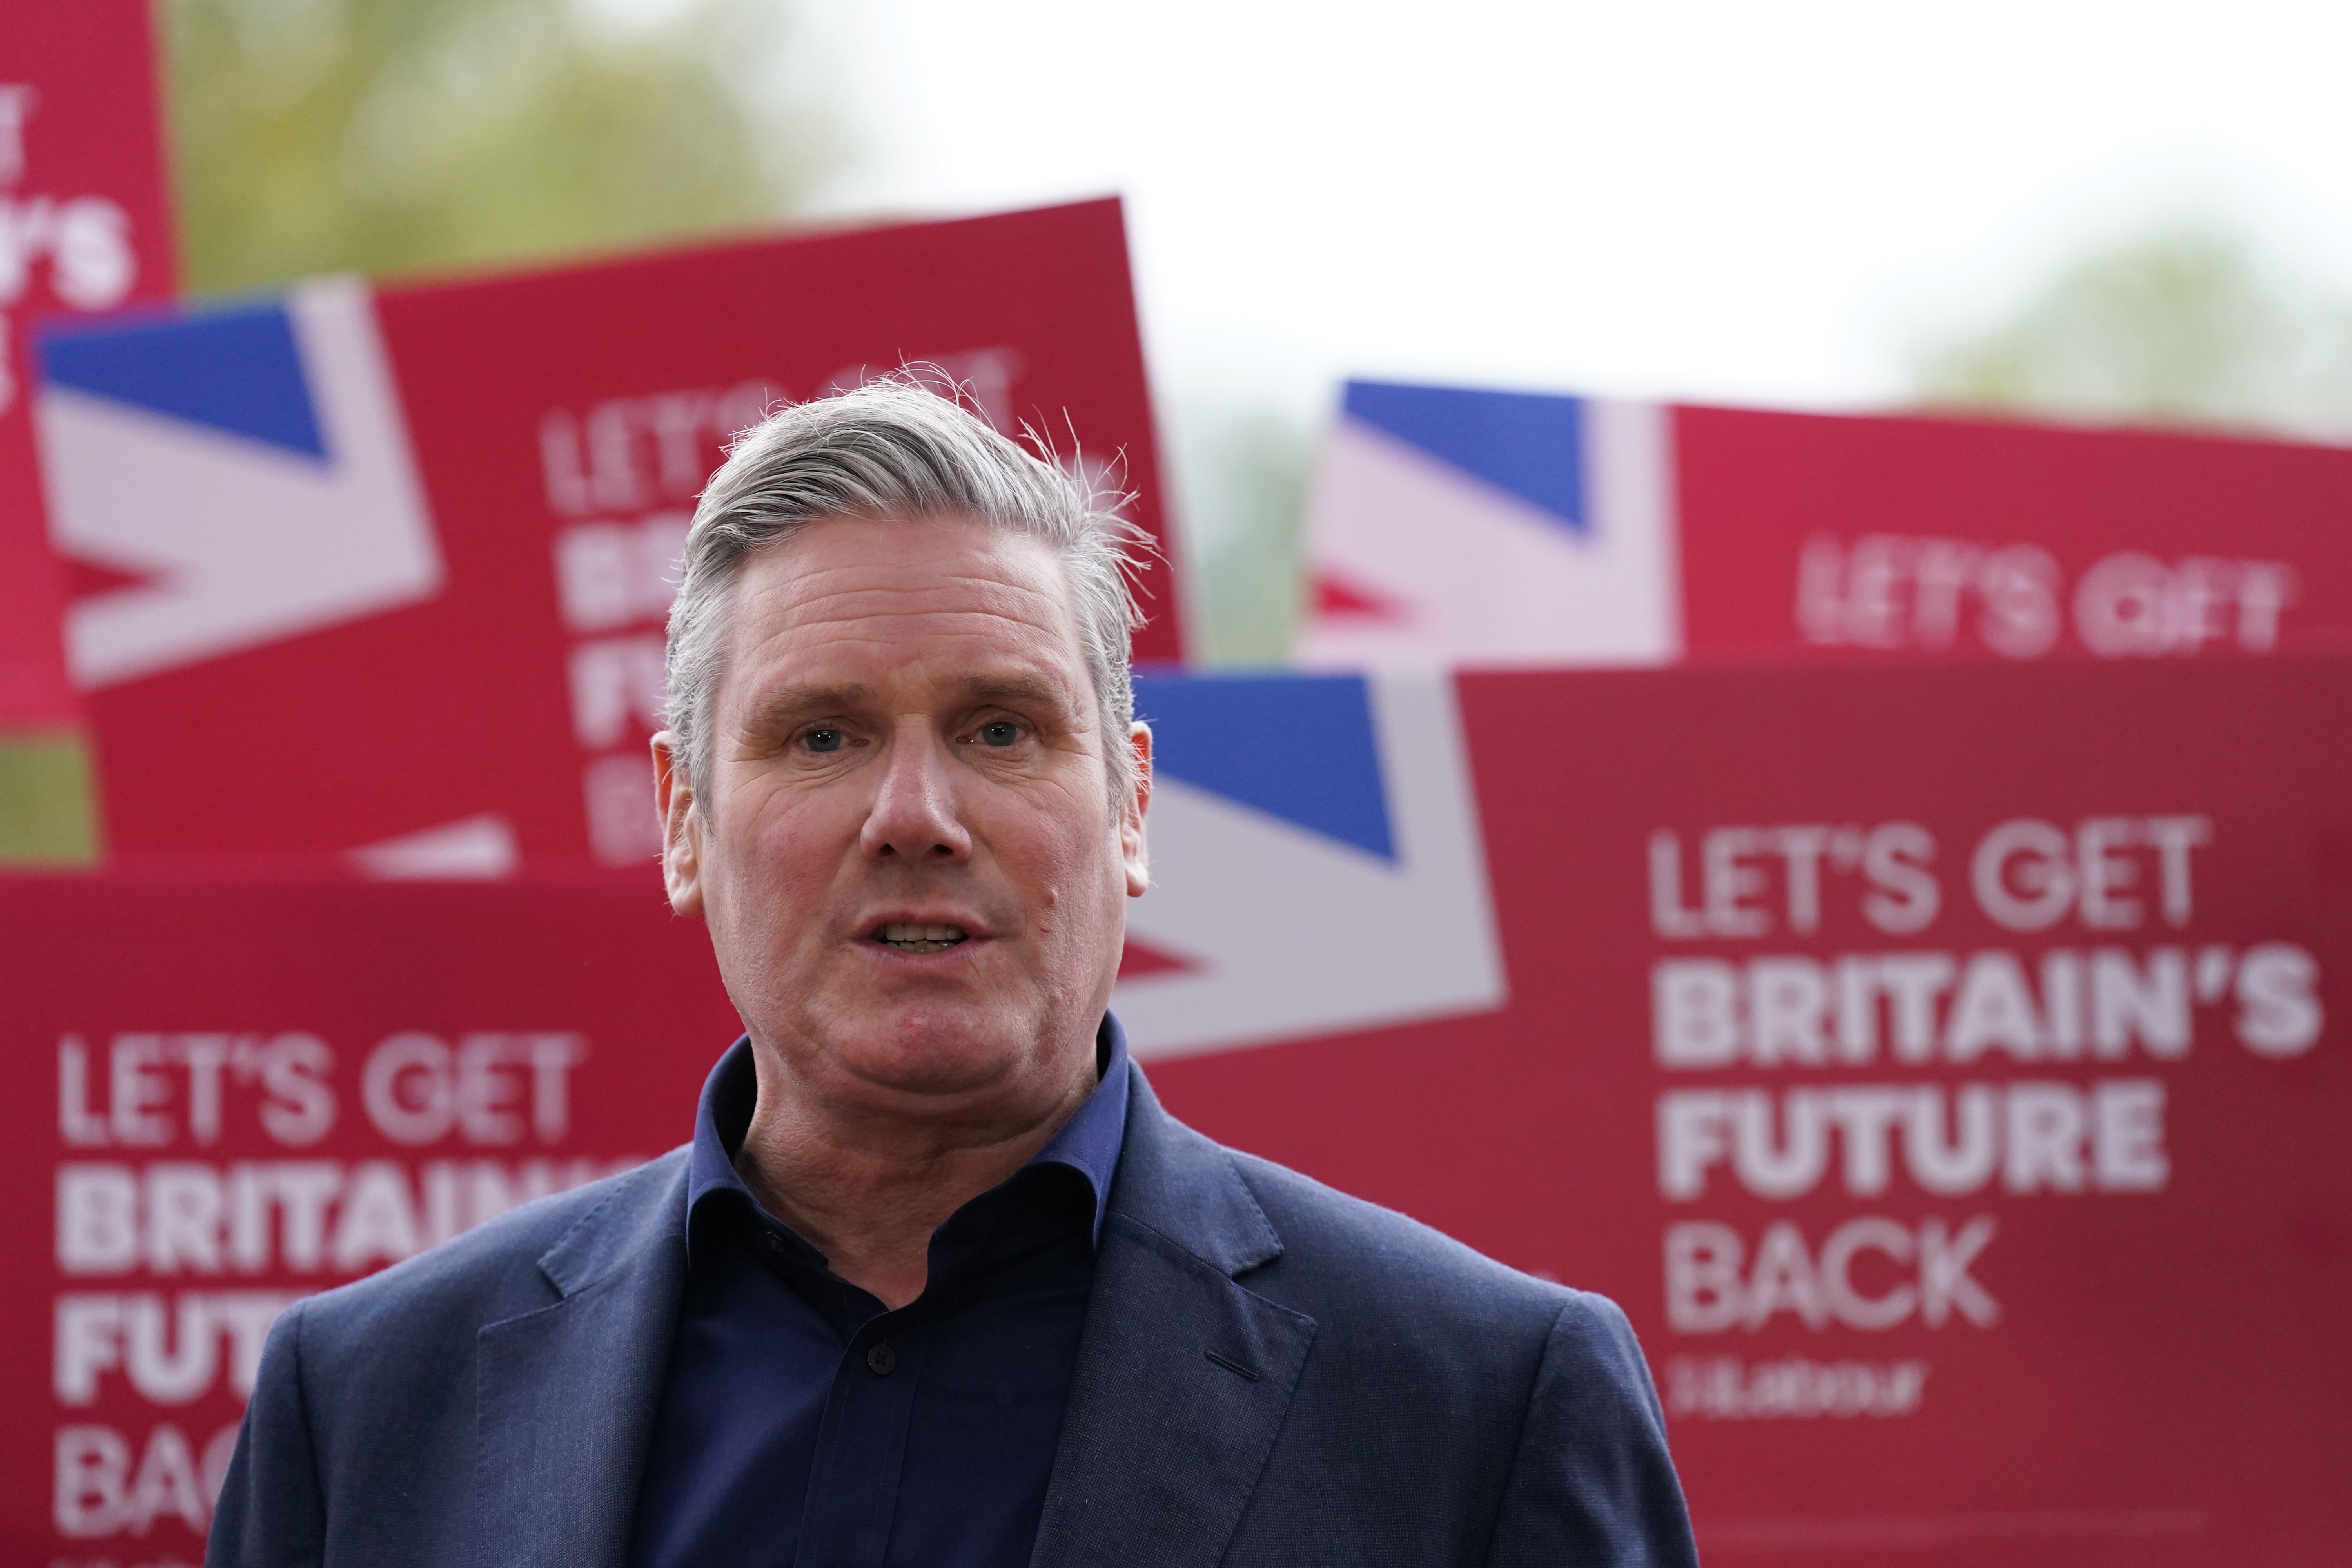 Starmer is under pressure over his stance on the Israel-Hamas conflict